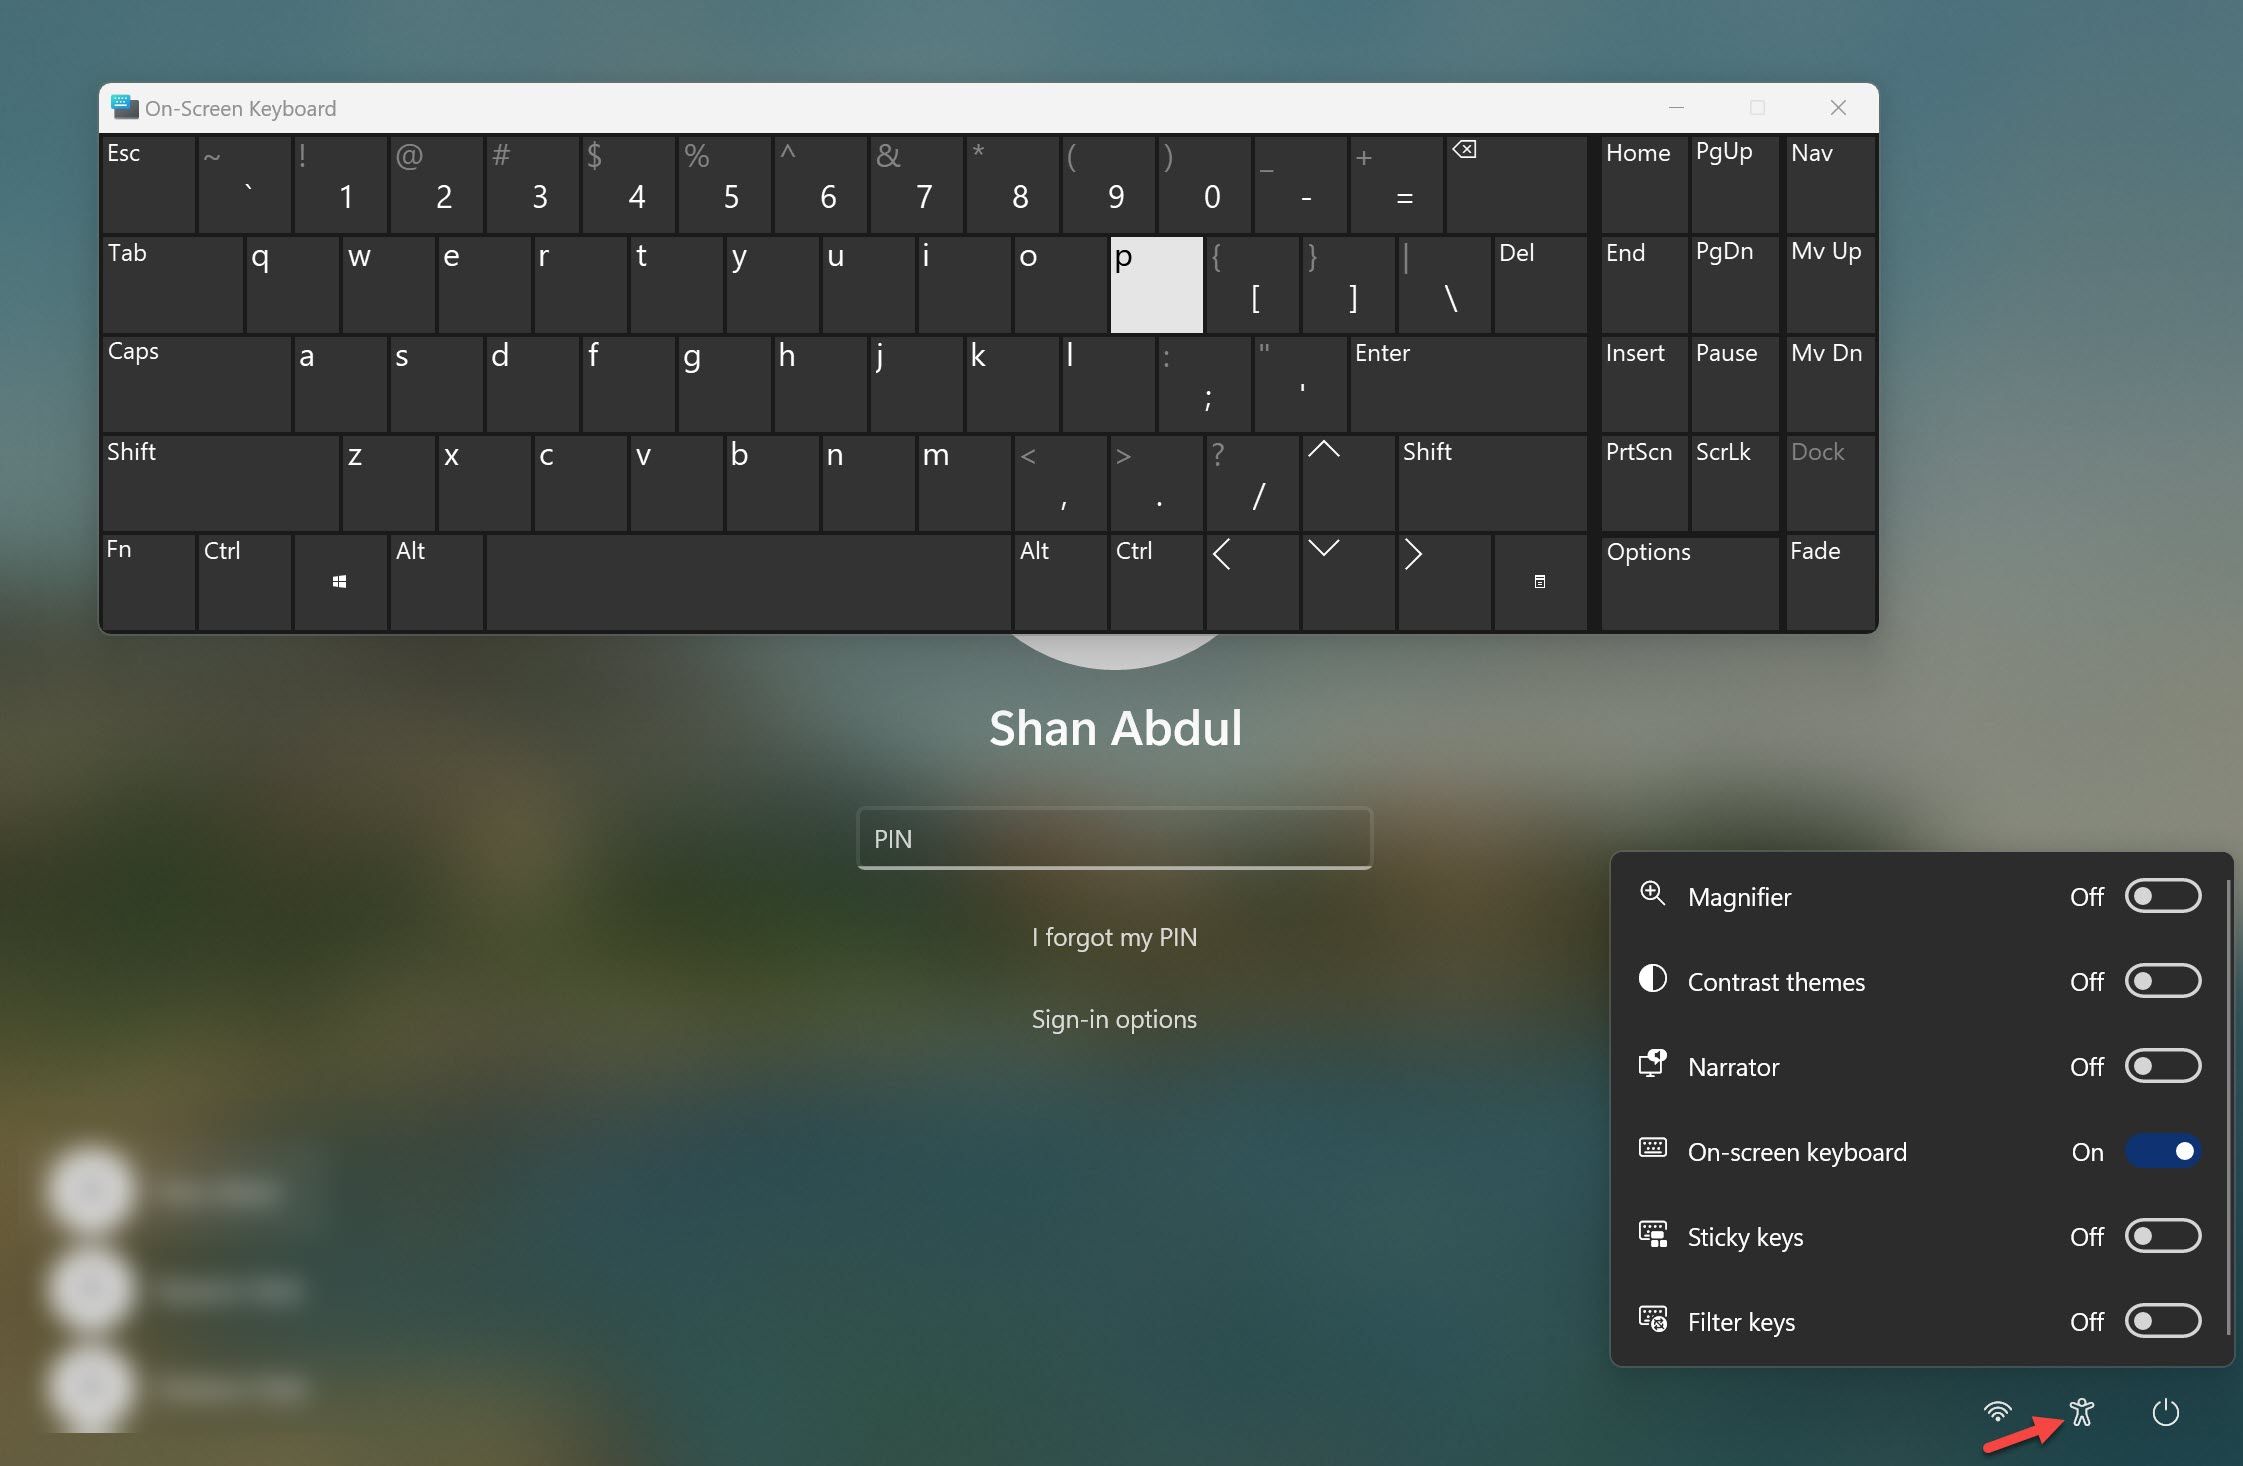 Activate Onscreen Keyboard From Accessibility Settings and Enter Your Password